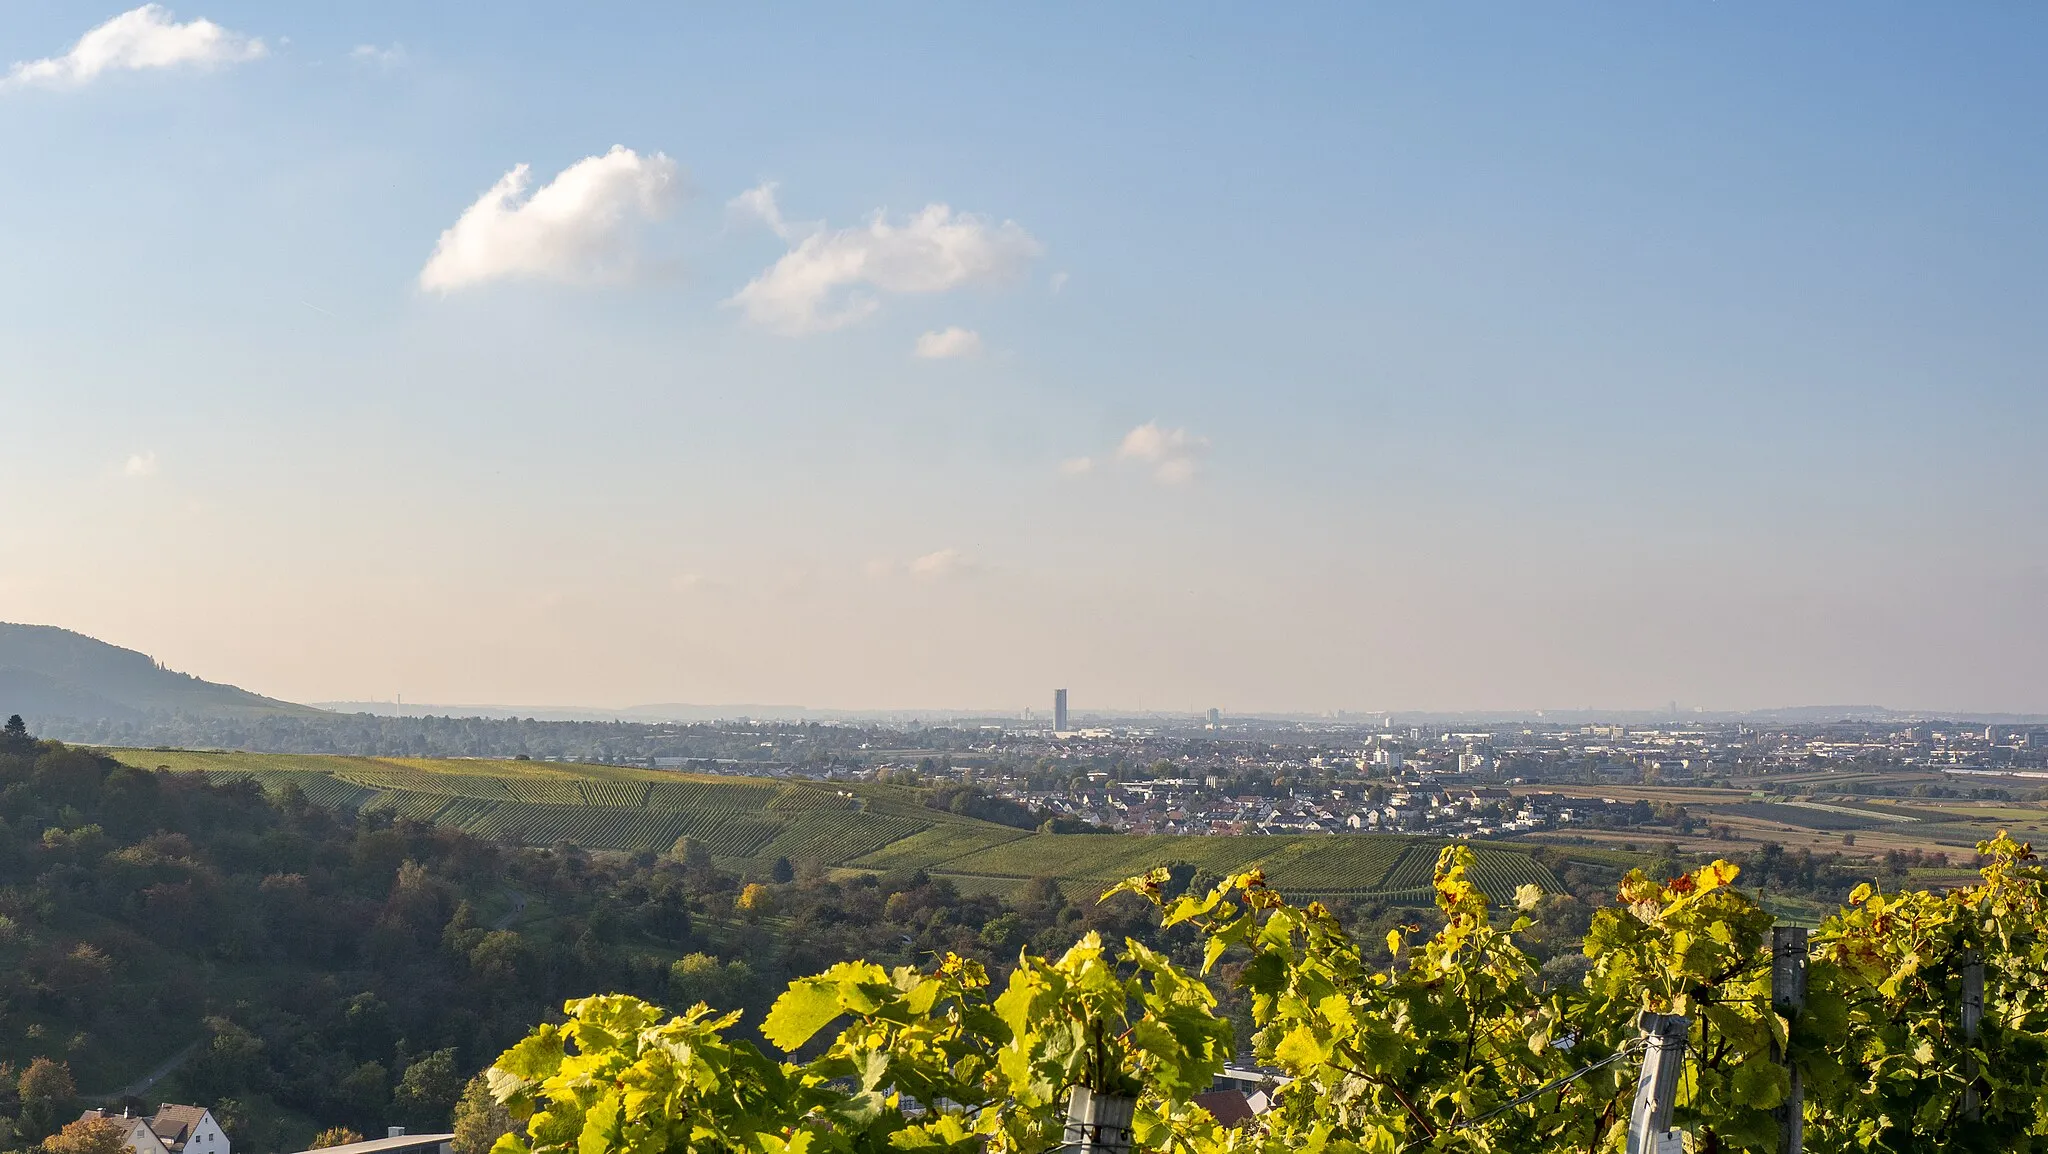 Photo showing: Fellbach from Strümpfelbach, Baden-Württemberg, Germany. The high-rise building in the center is SLT 107 Schwabenlandtower.